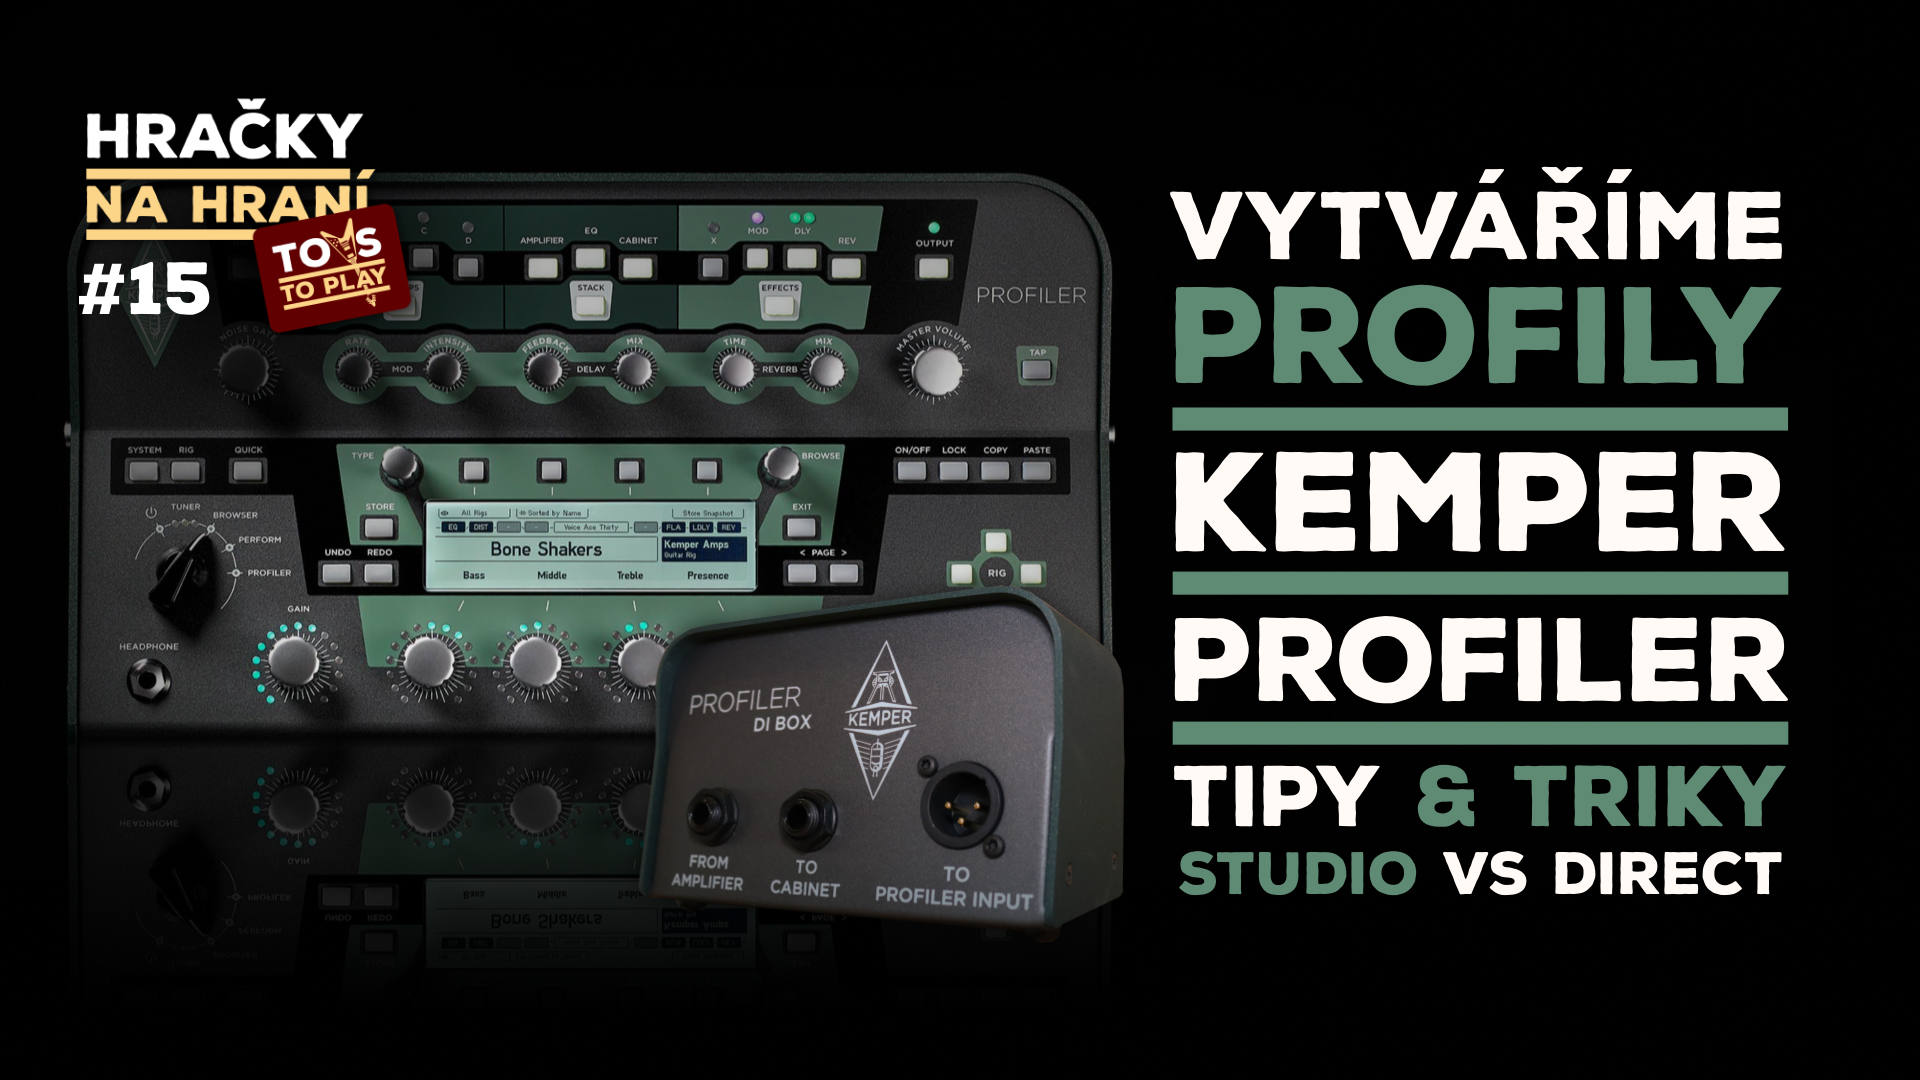 Toys to Play #15 - Kemper Profiler: How to profile your guitar rig